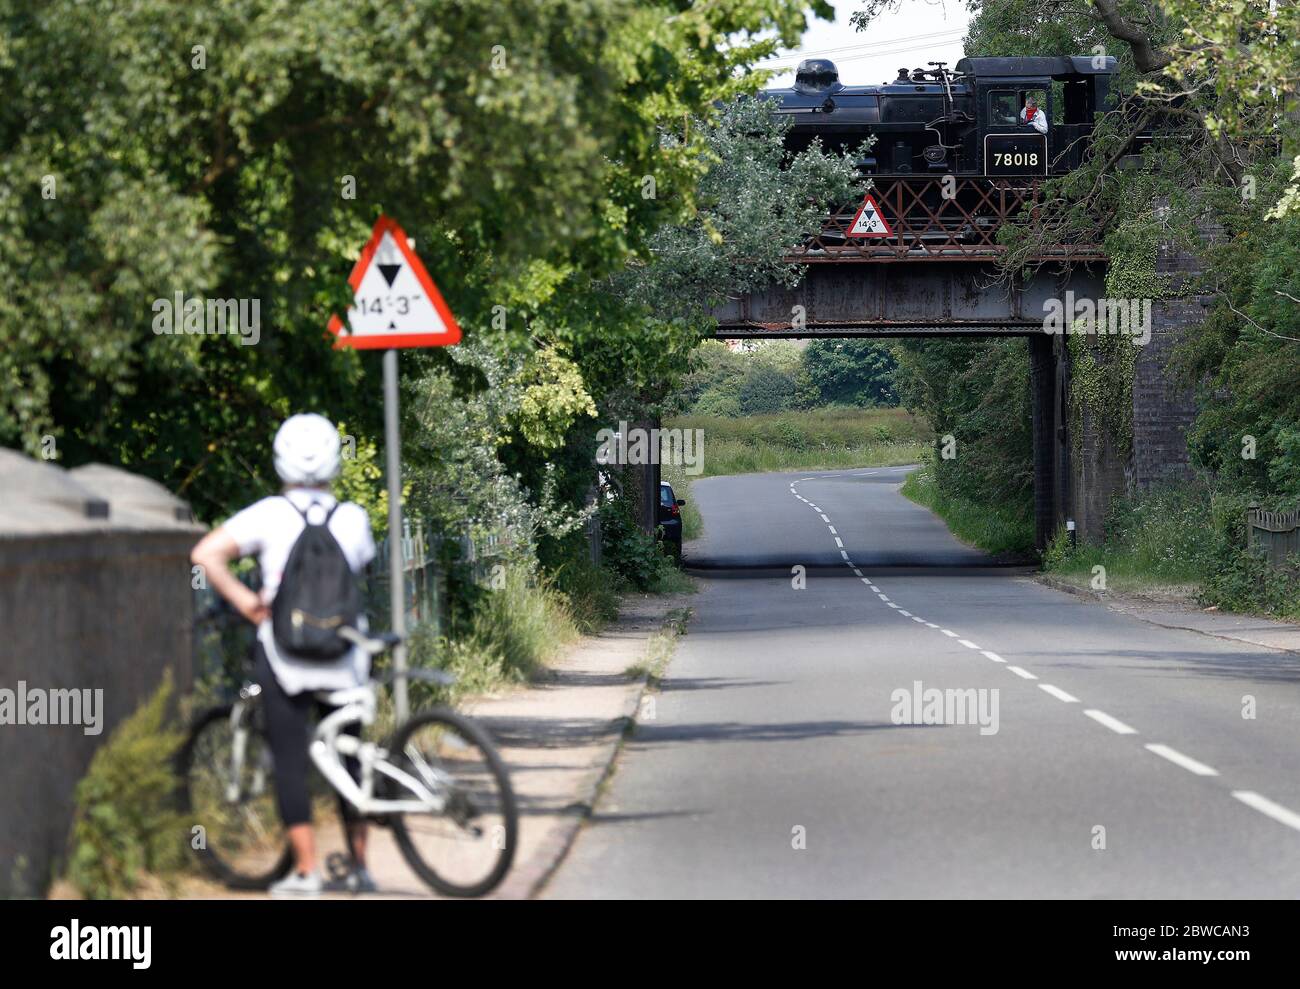 Loughborough, Leicestershire, UK. 31st May 2020. A cyclist stops to watch the testing of a Standard Class 2 locomotive steam train from the Great Central Railway after coronavirus pandemic lockdown restrictions were eased. Credit Darren Staples/Alamy Live News. Stock Photo